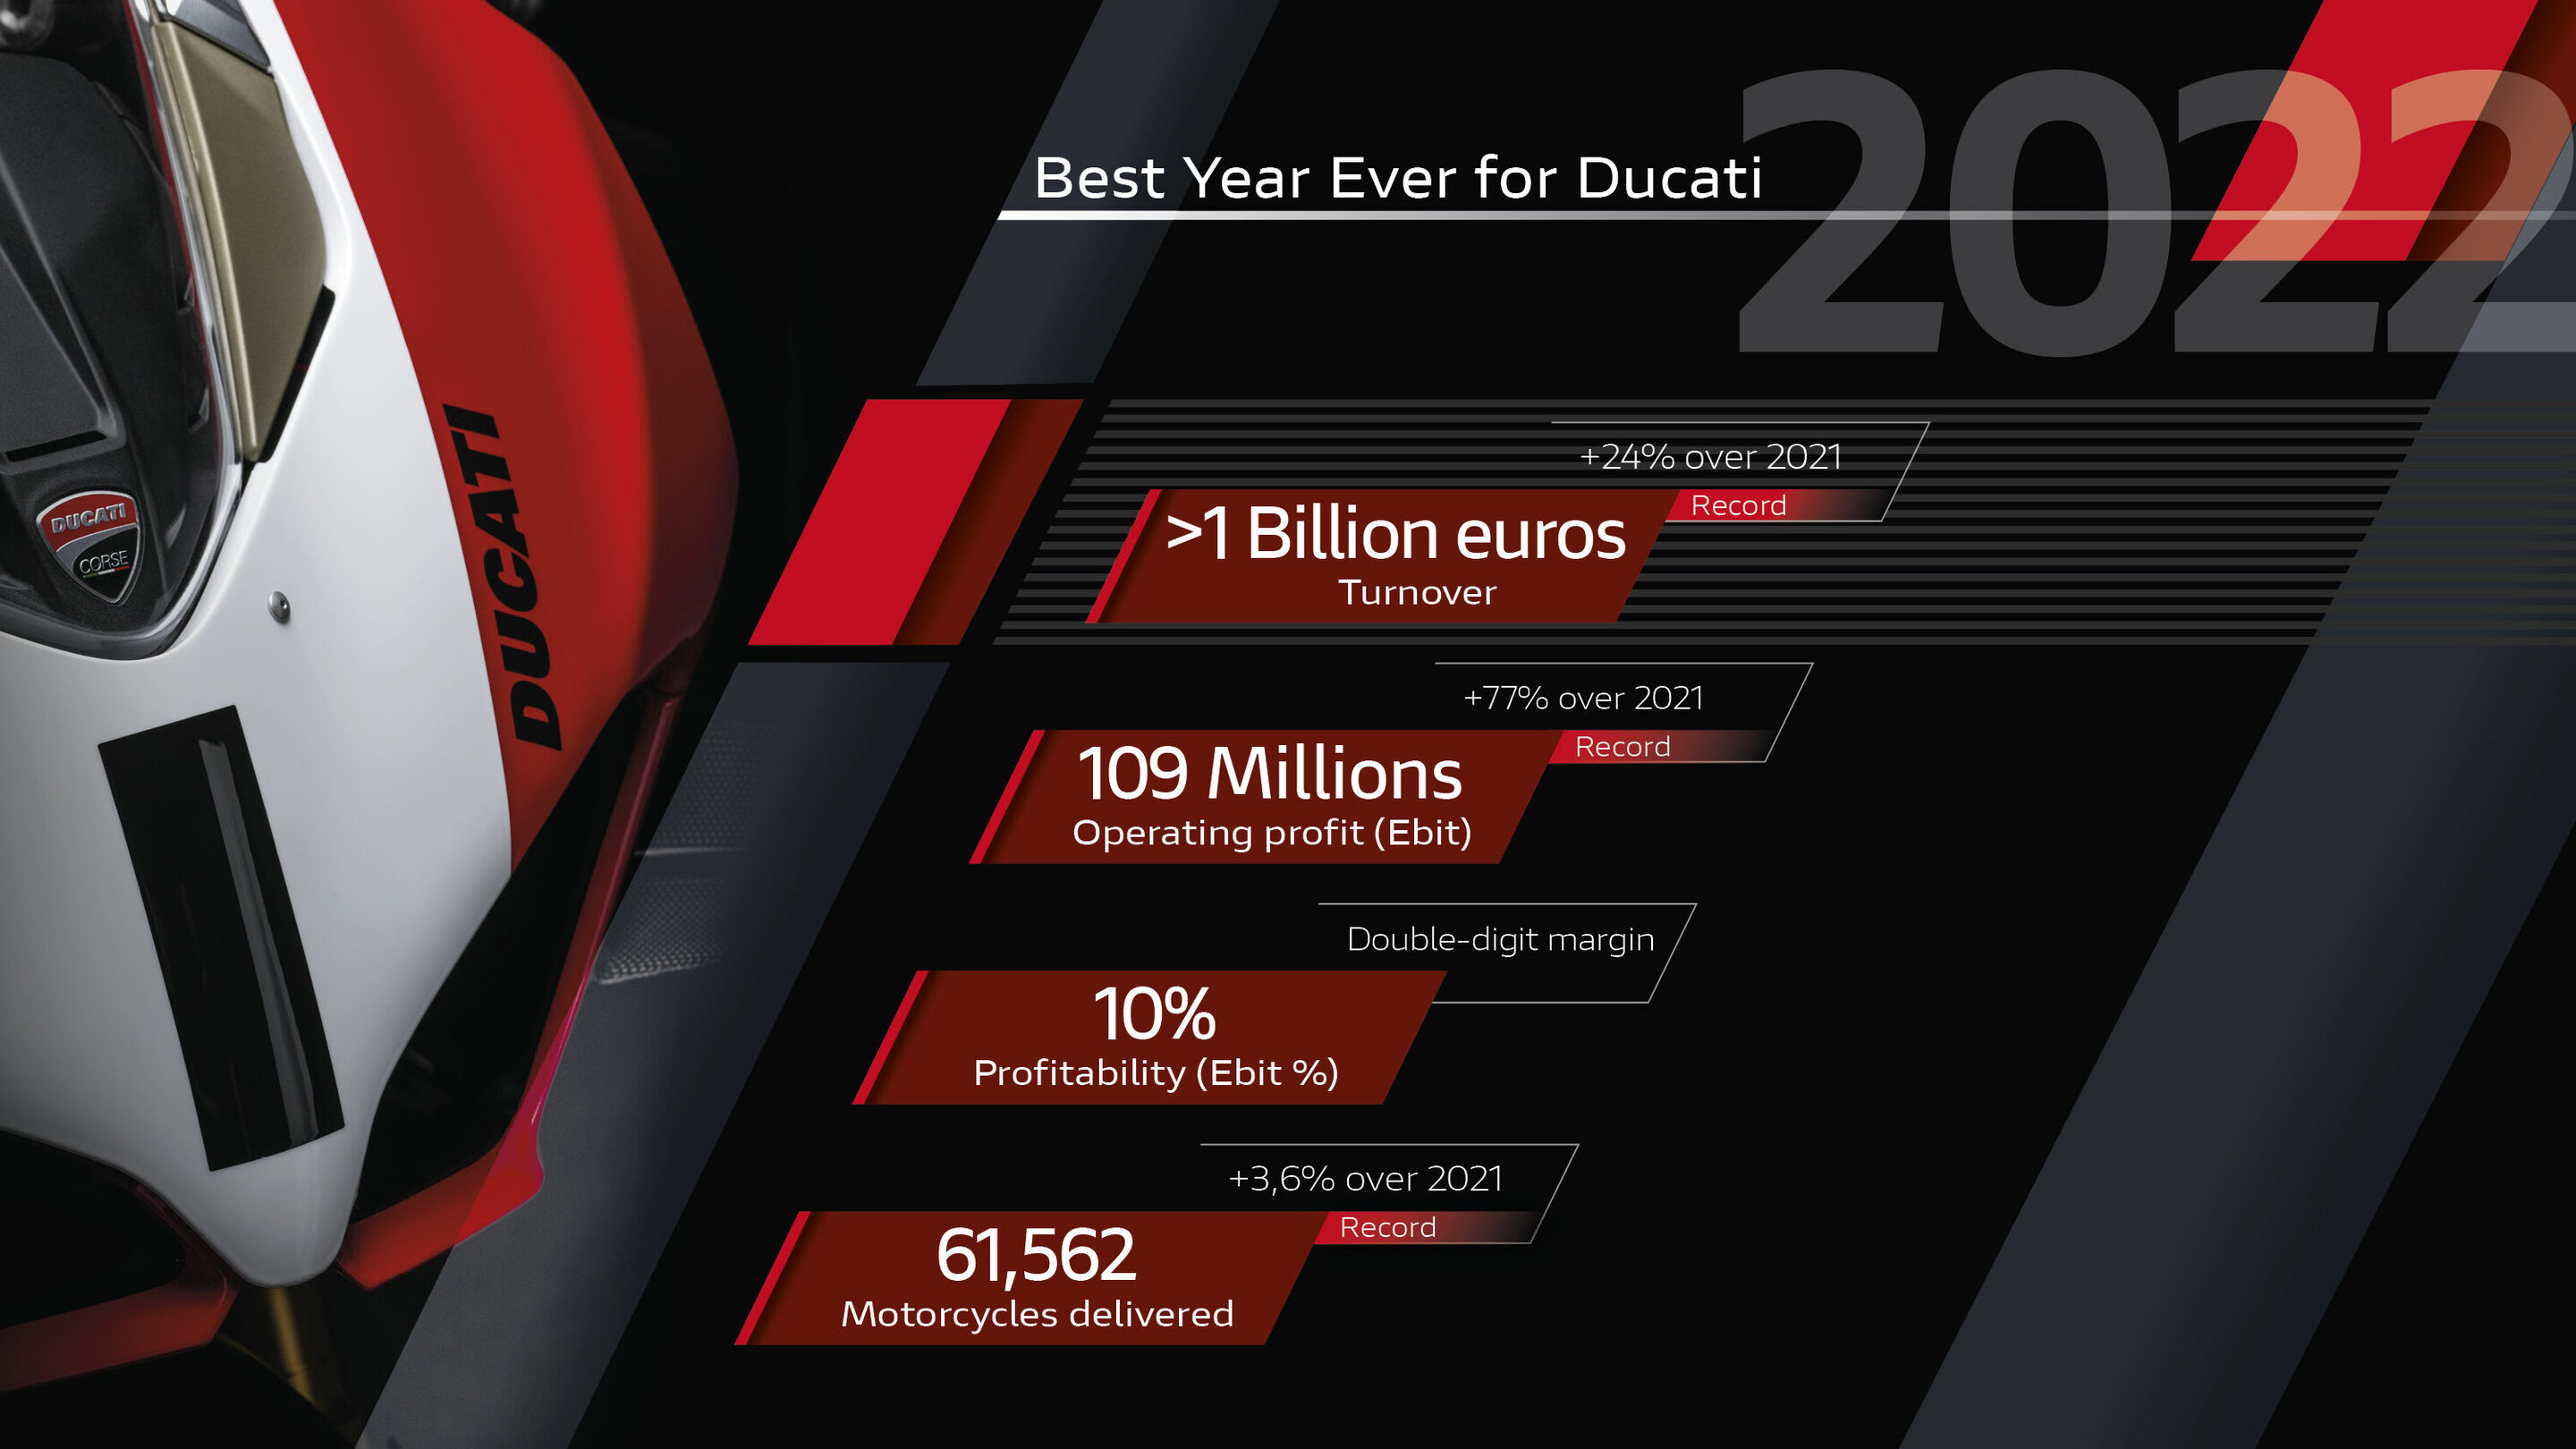 Ducati overcomes 1 billion euros revenue for the first time in its history